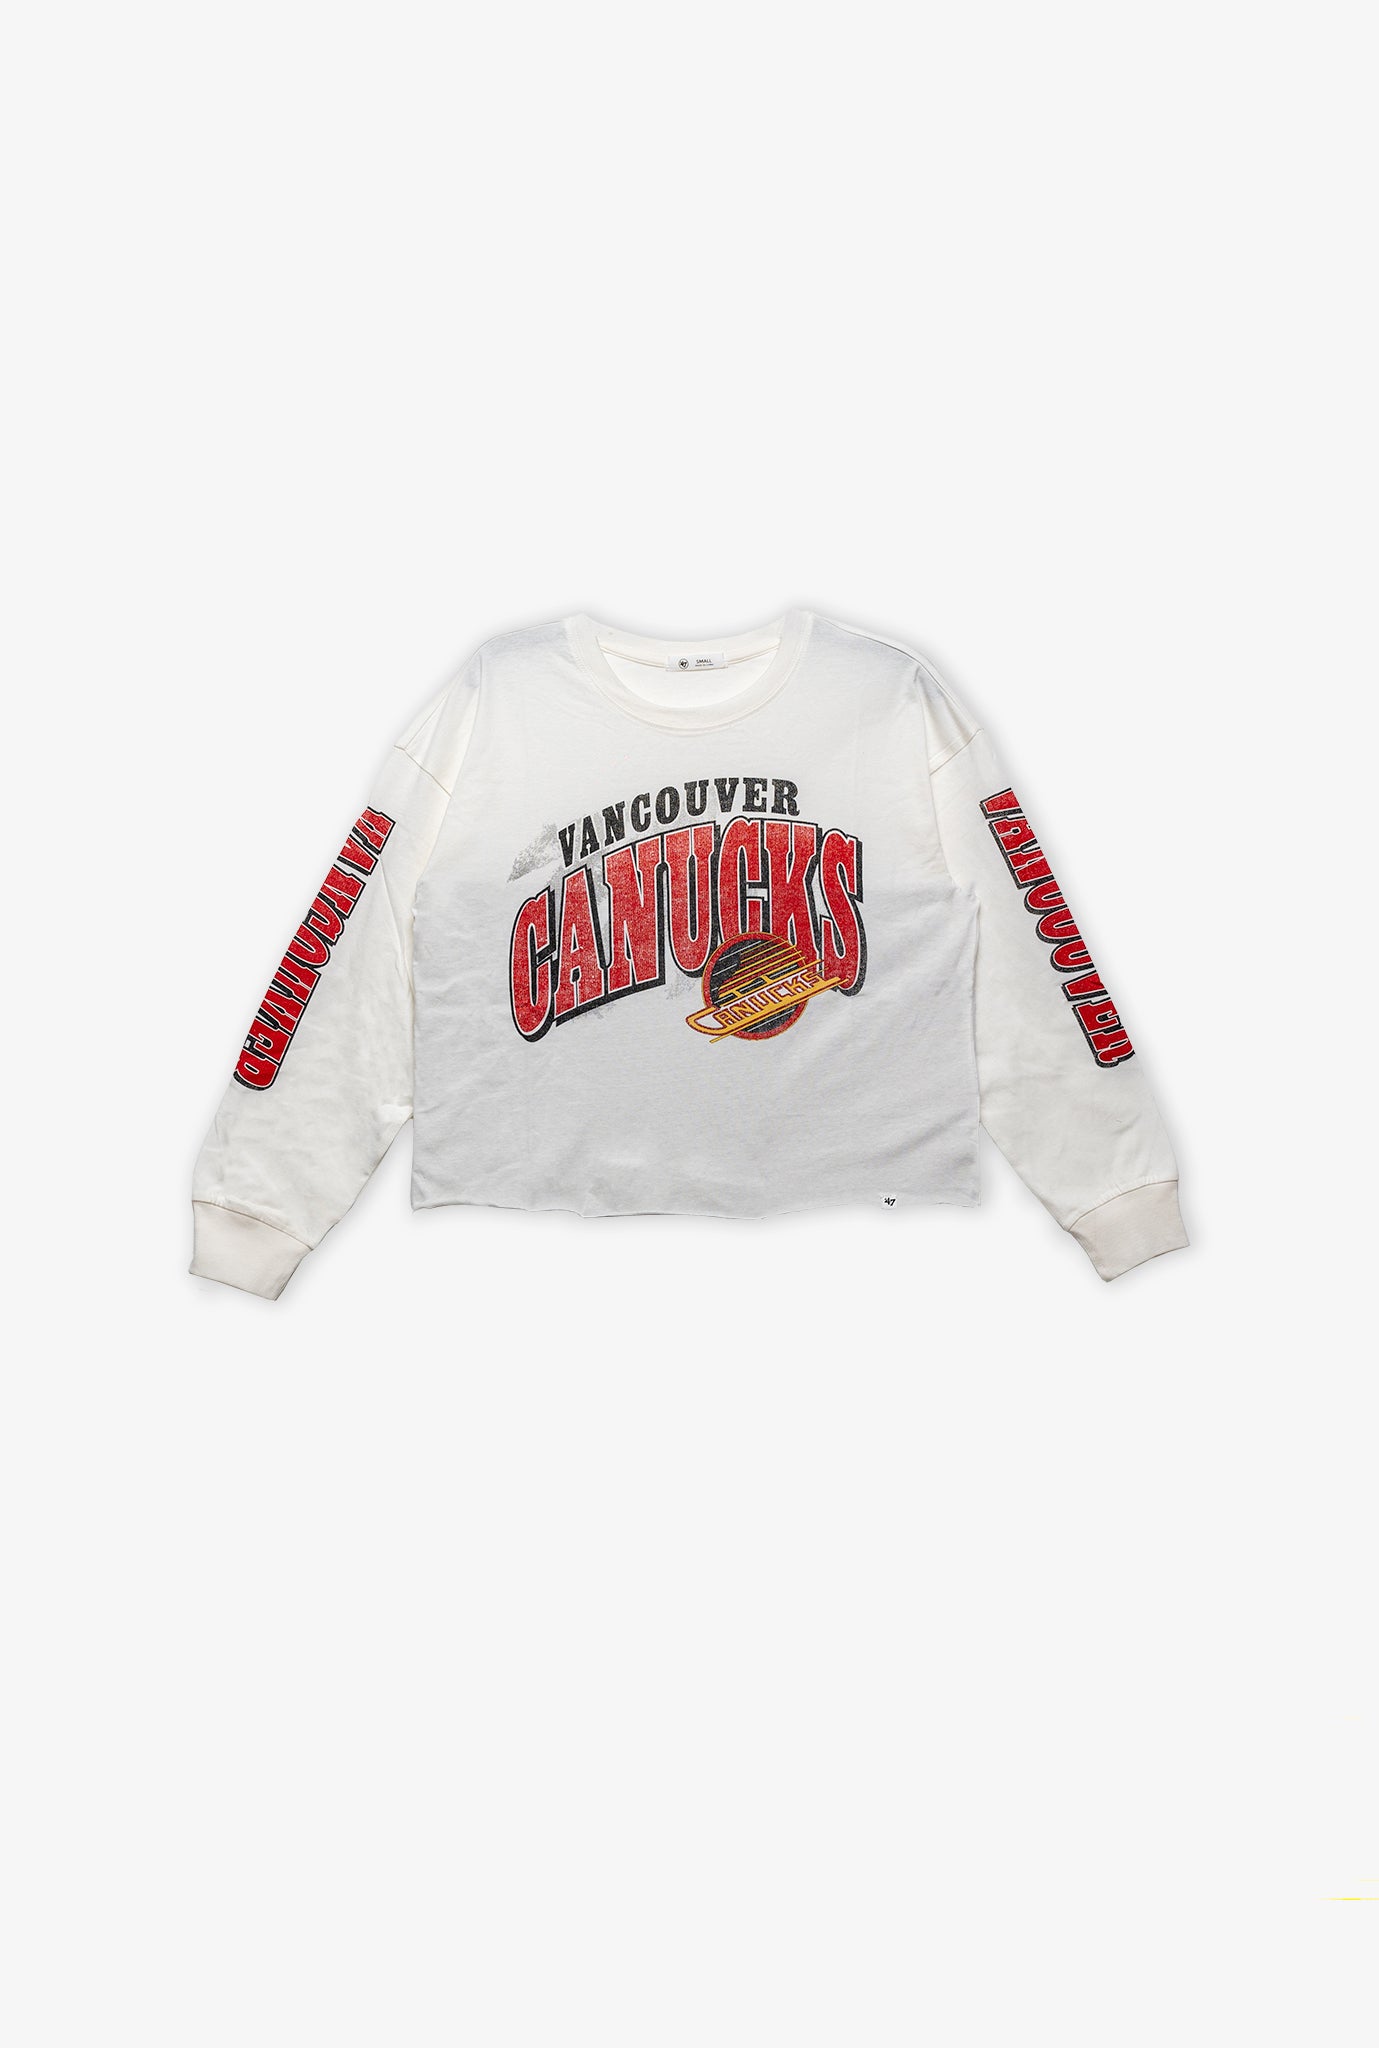 Vancouver Canucks Brush Back Parkway Long Sleeve